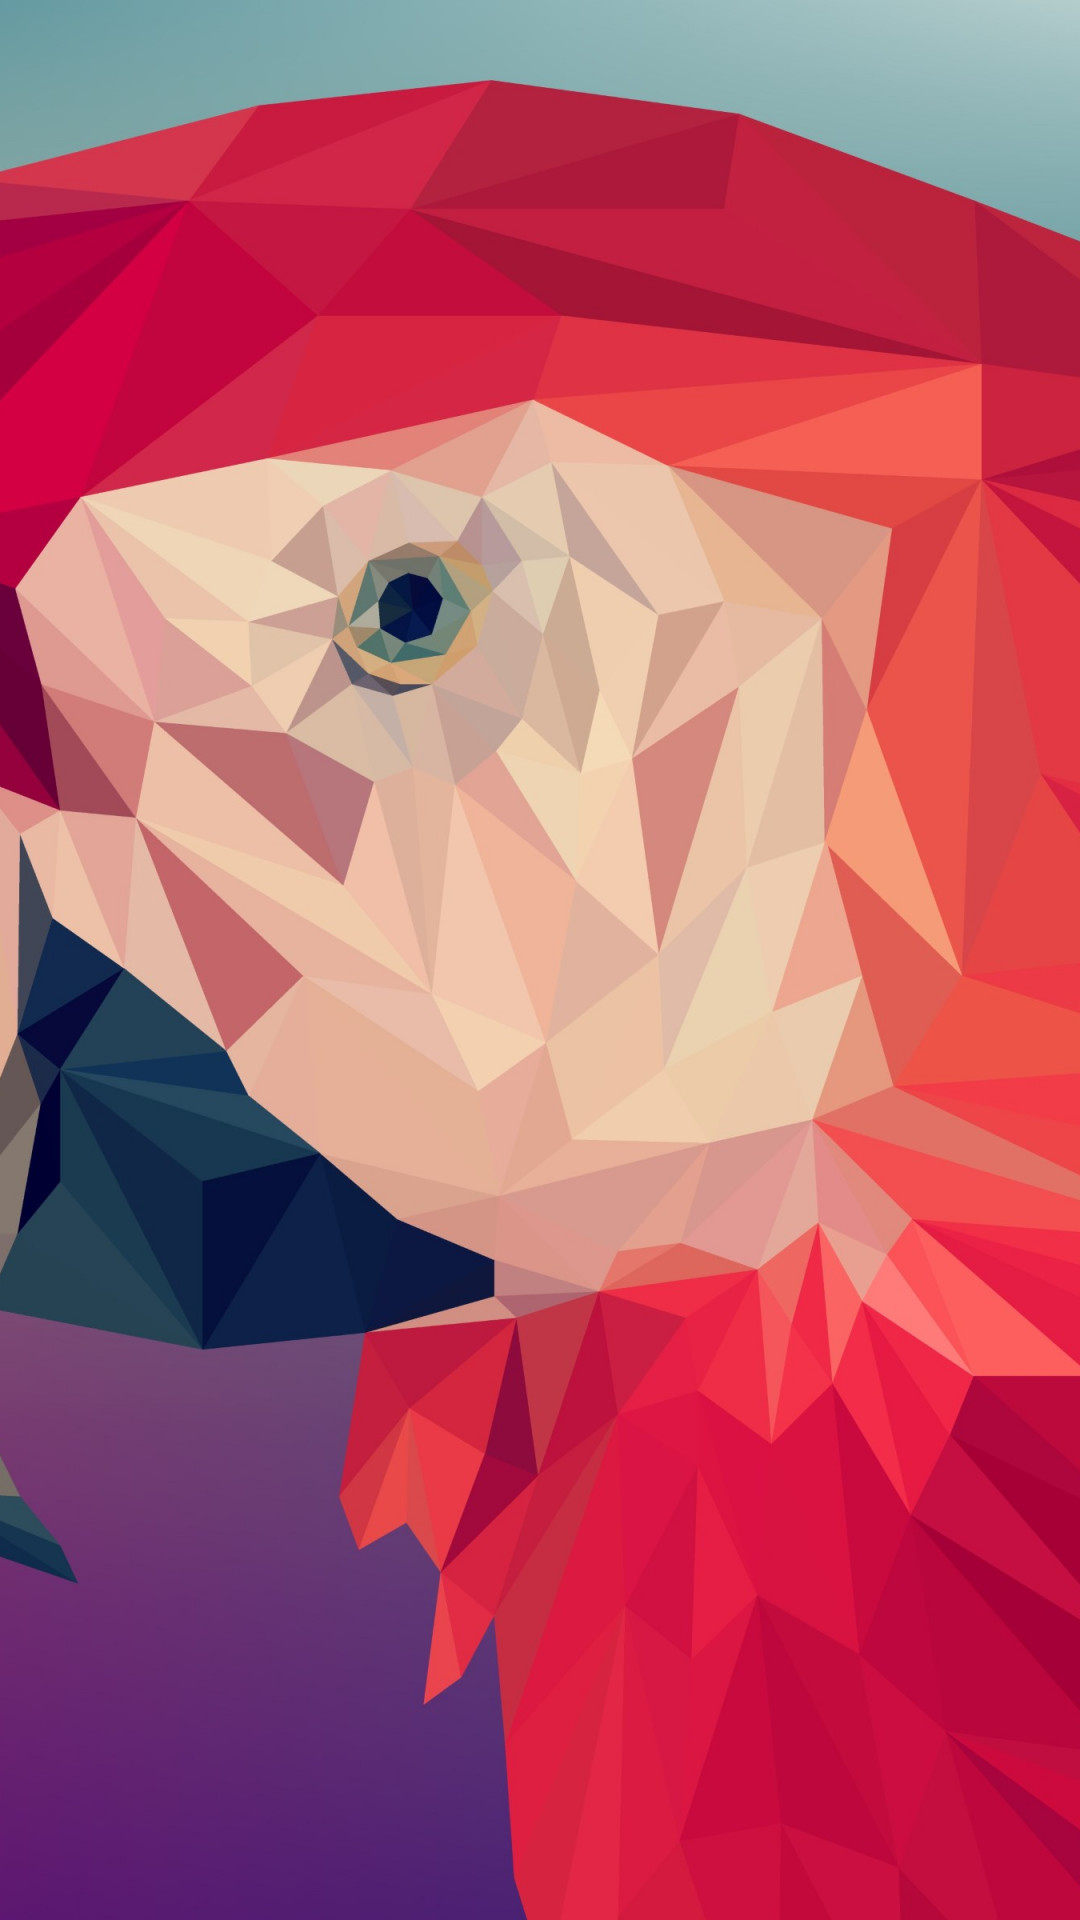 Low poly art: Red parrot wallpaper 1080x1920